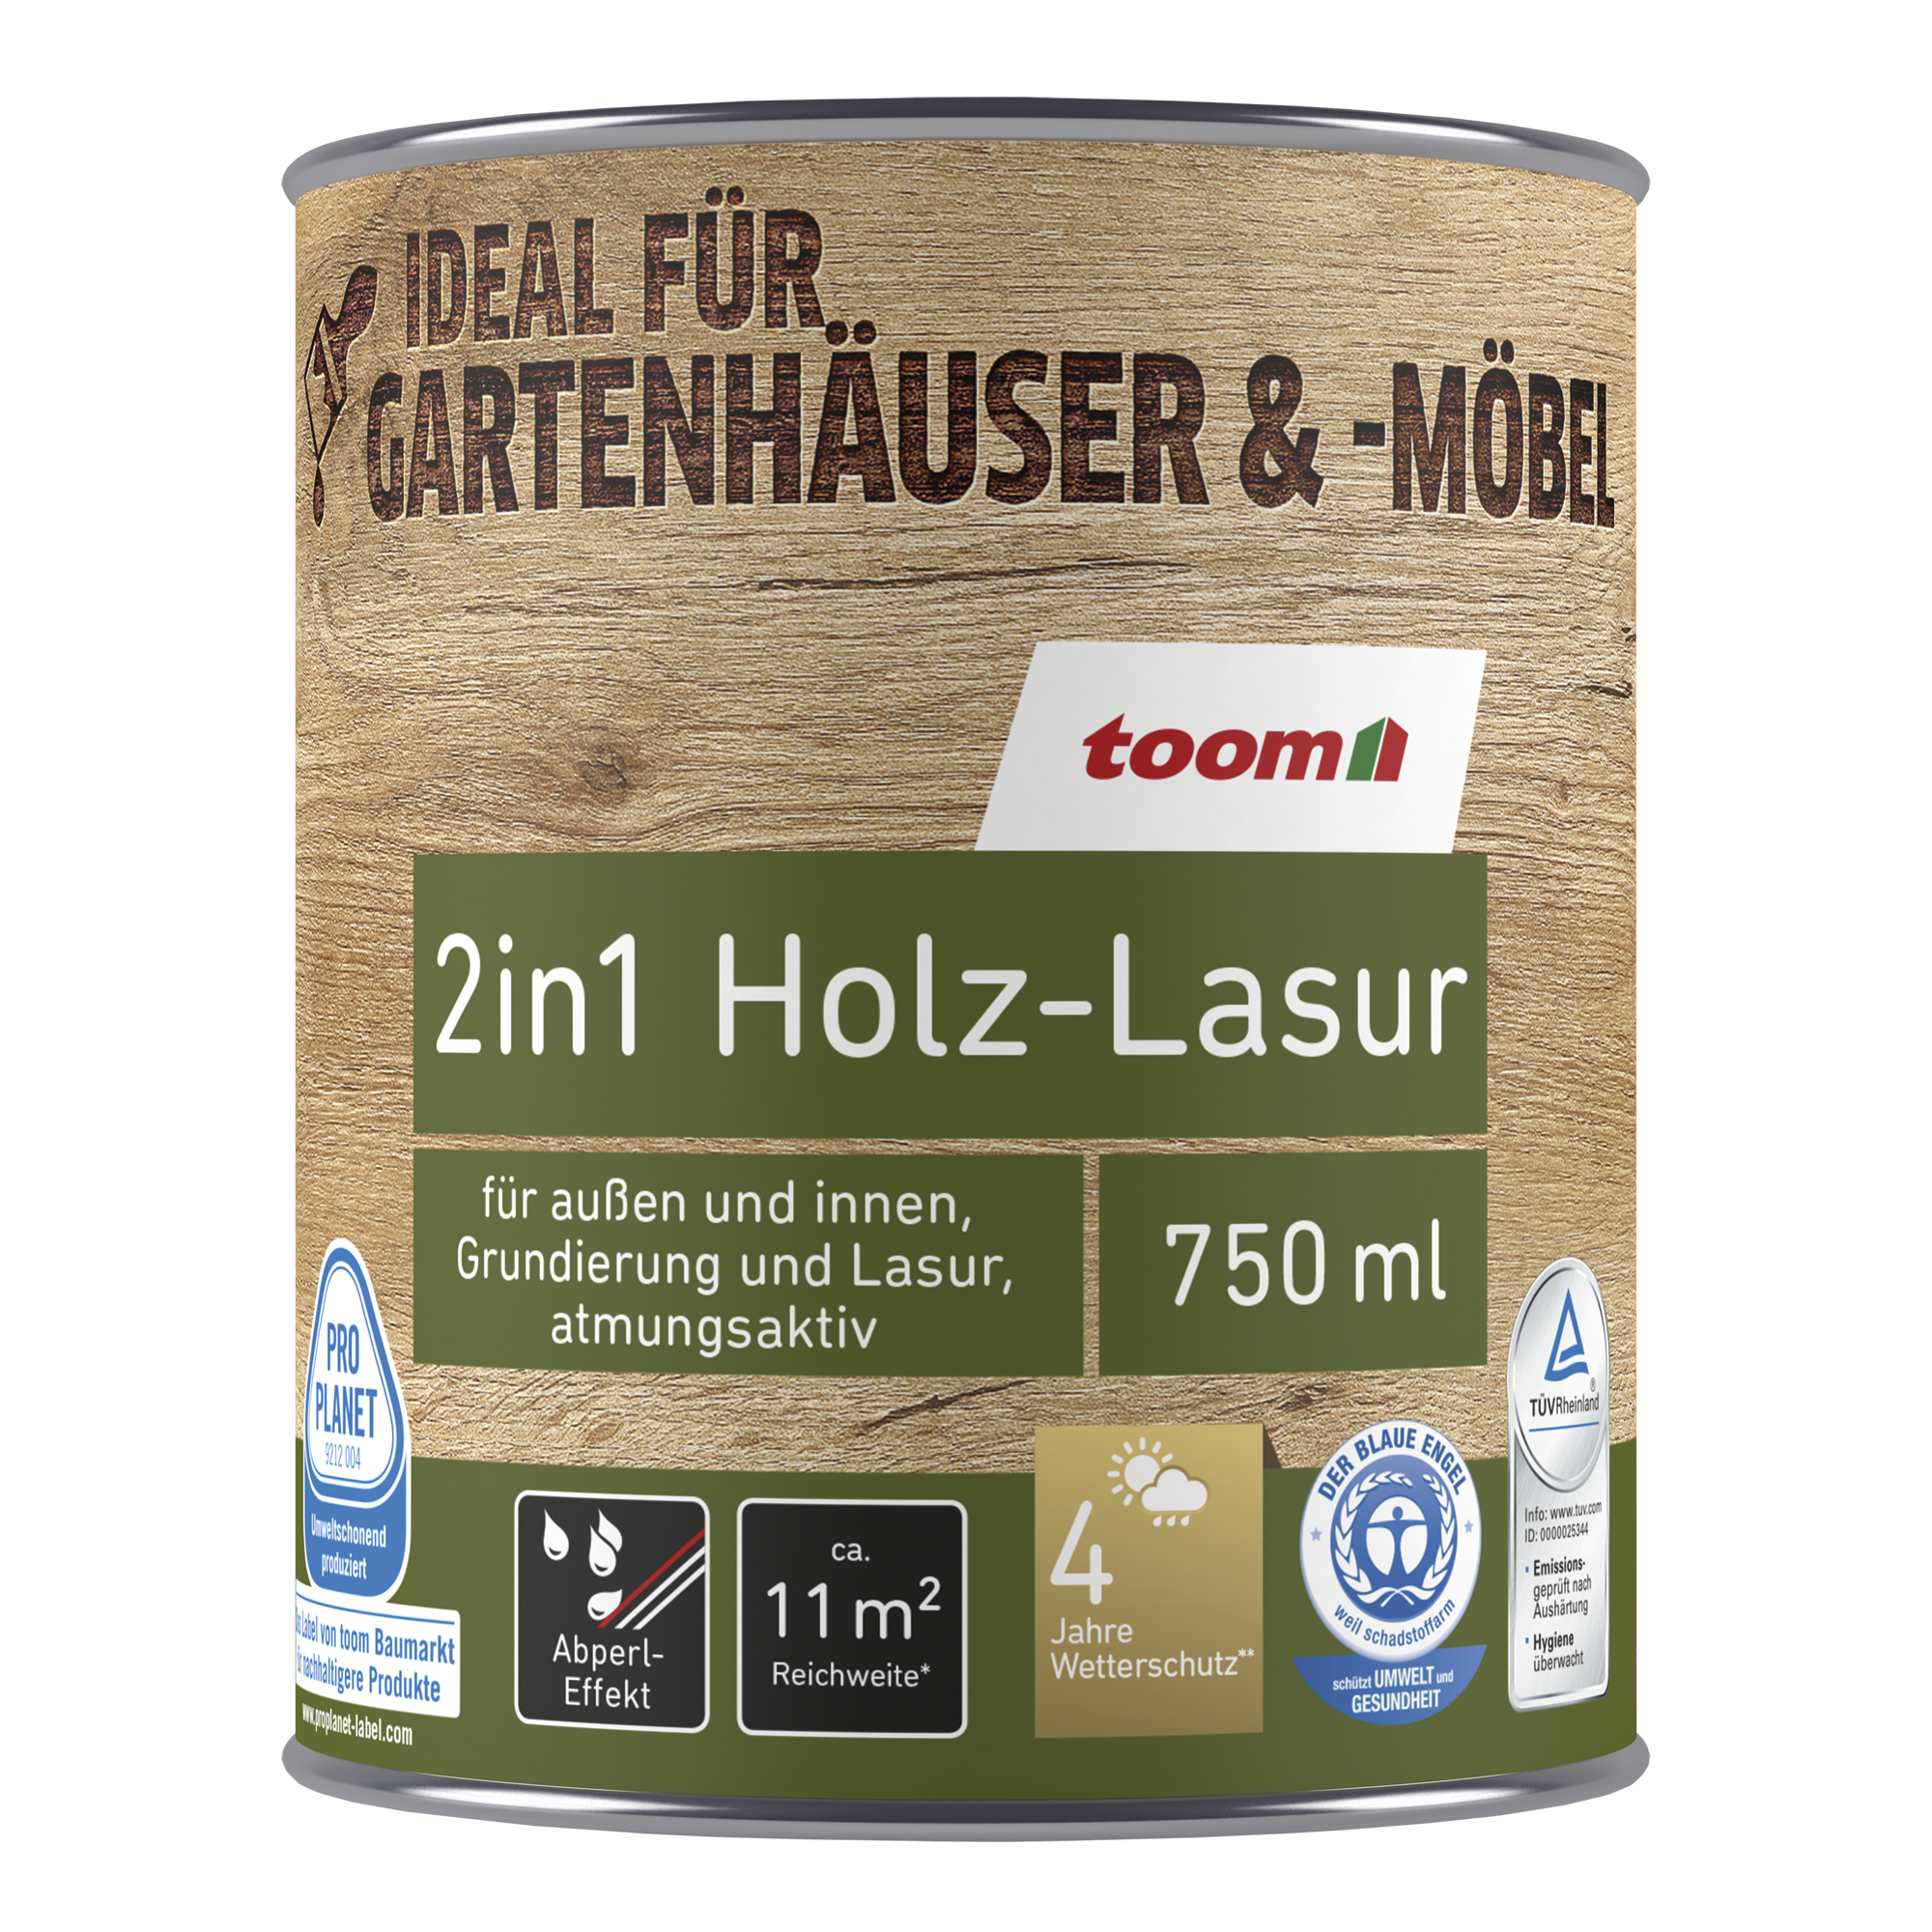 2in1 Holzlasur hellgrau 750 ml + product picture